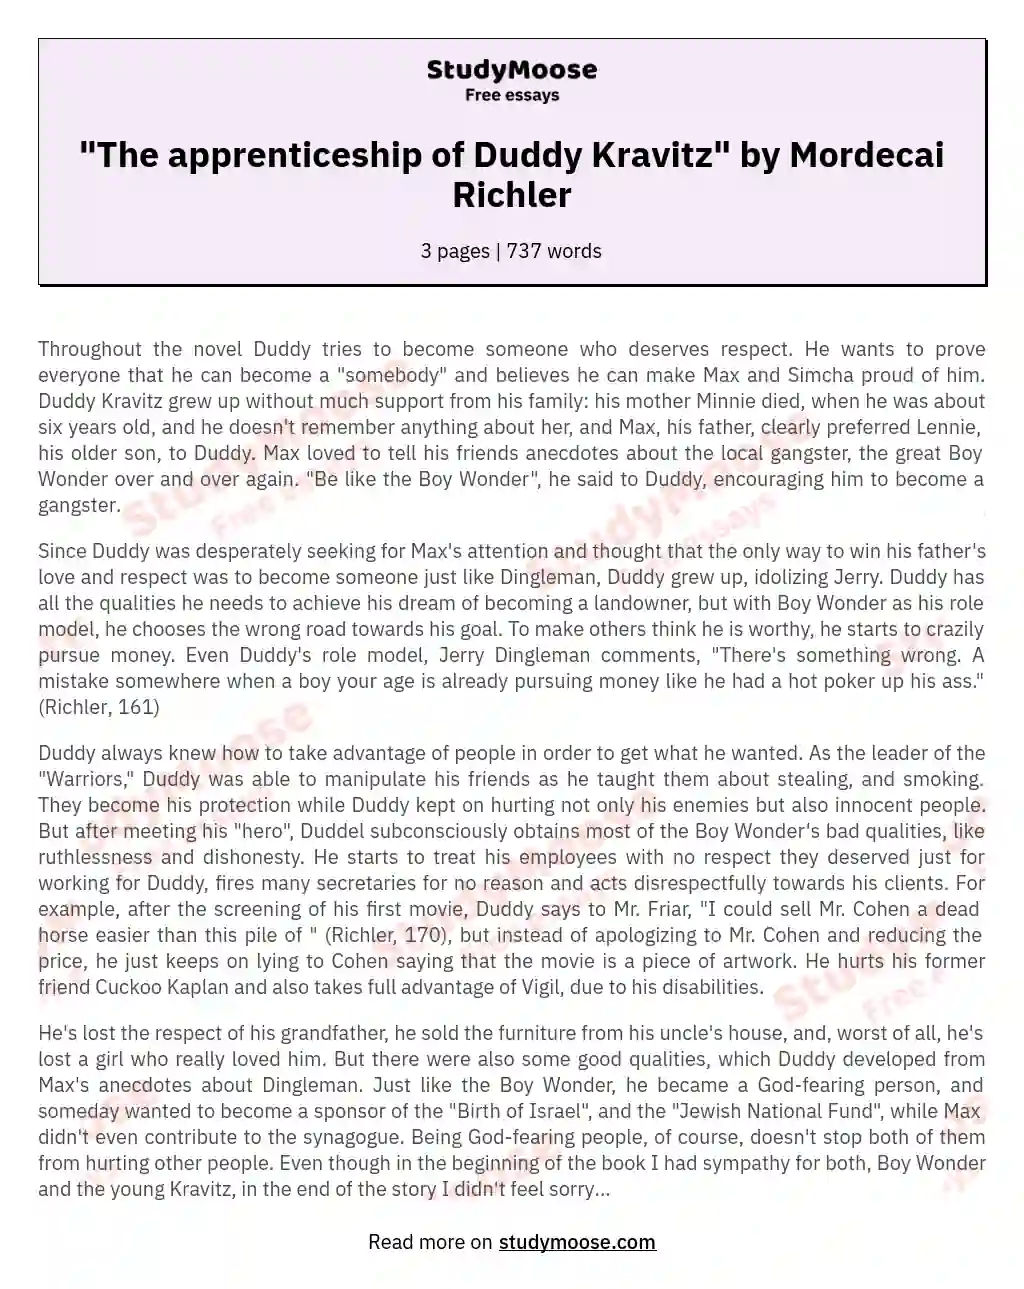 The Moral Odyssey of Duddy Kravitz: Ambition, Integrity, and Redemption essay